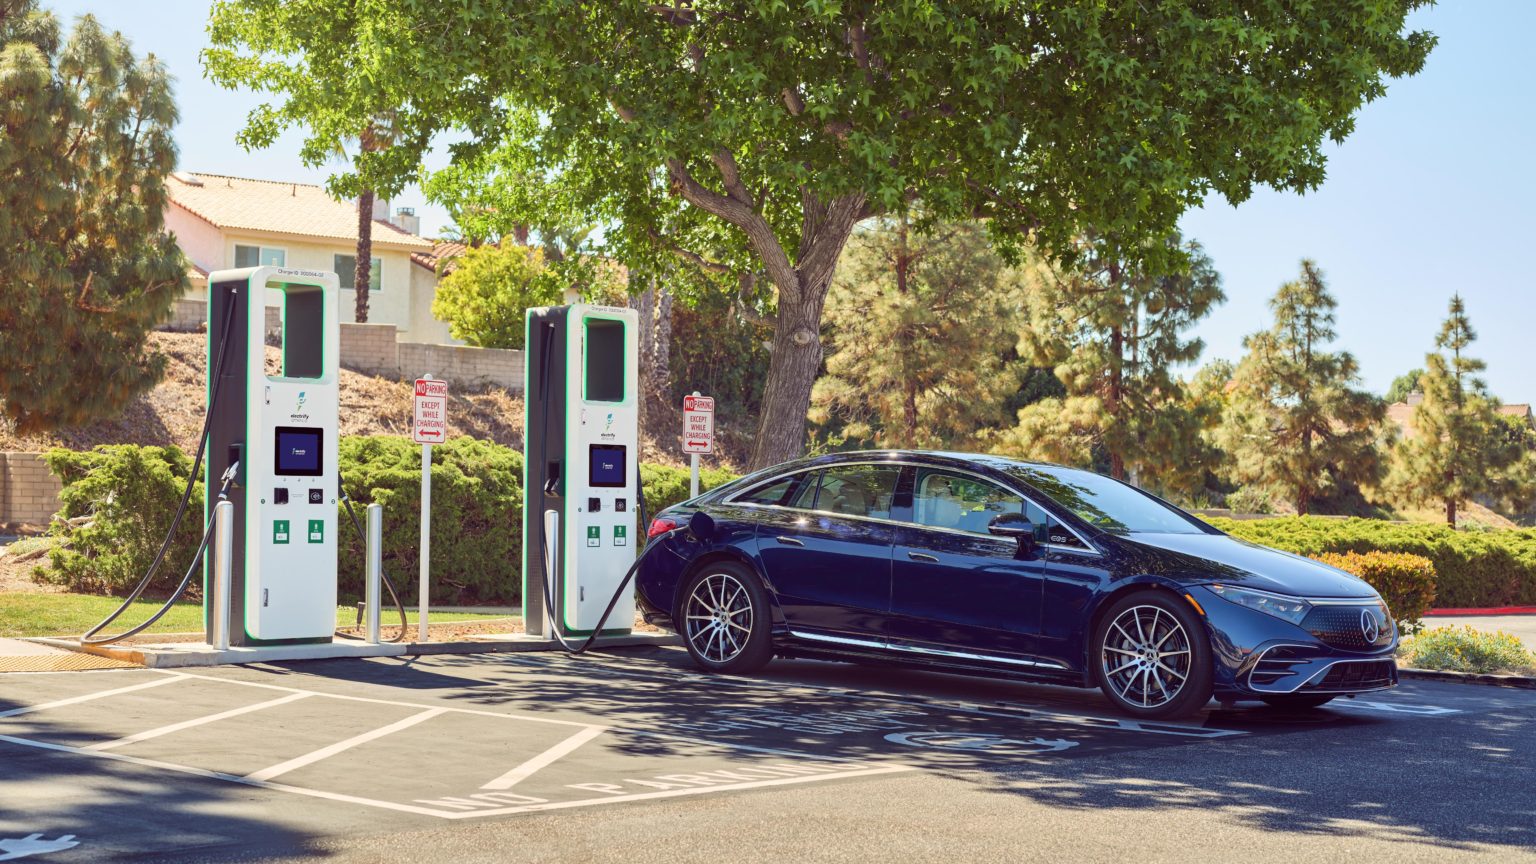 EQS buyers will have access to two years of free charging.